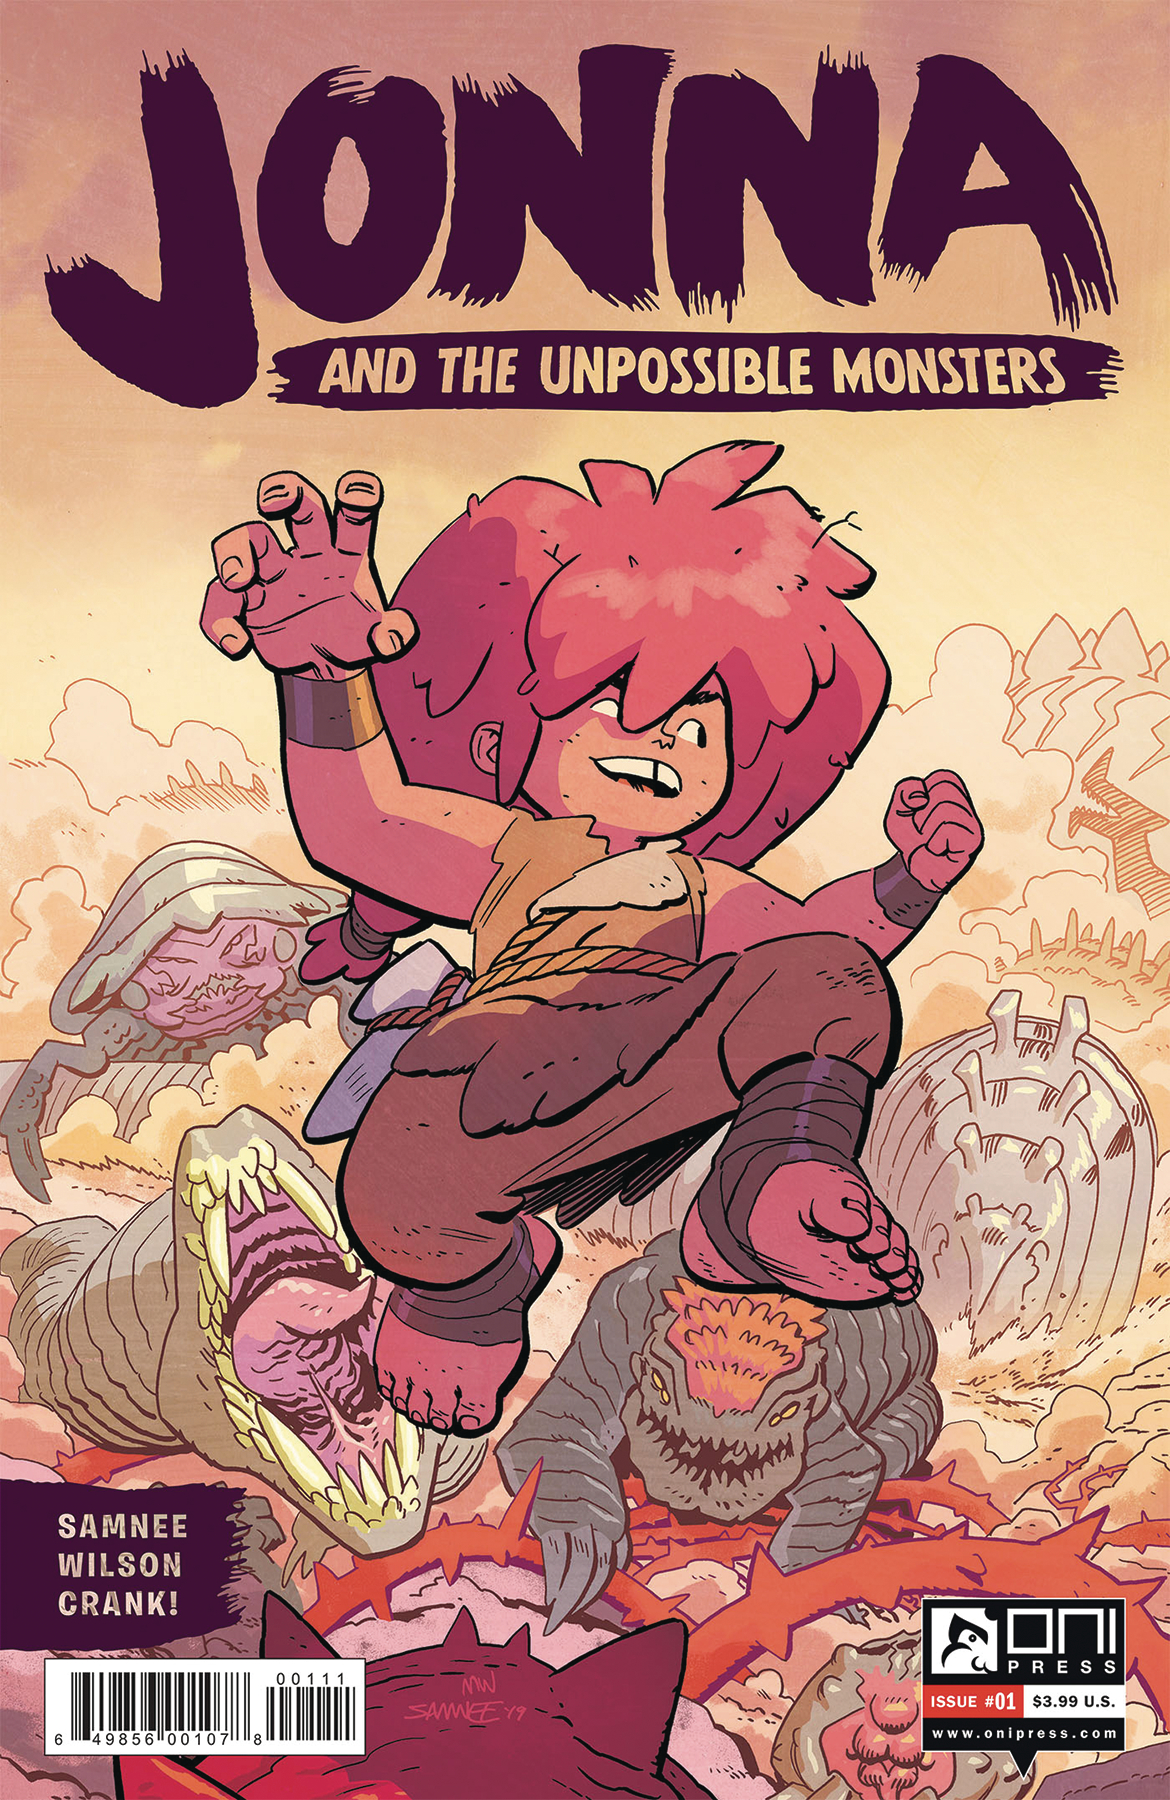 Jonna and the Unpossible Monsters #1 Cover A Samnee